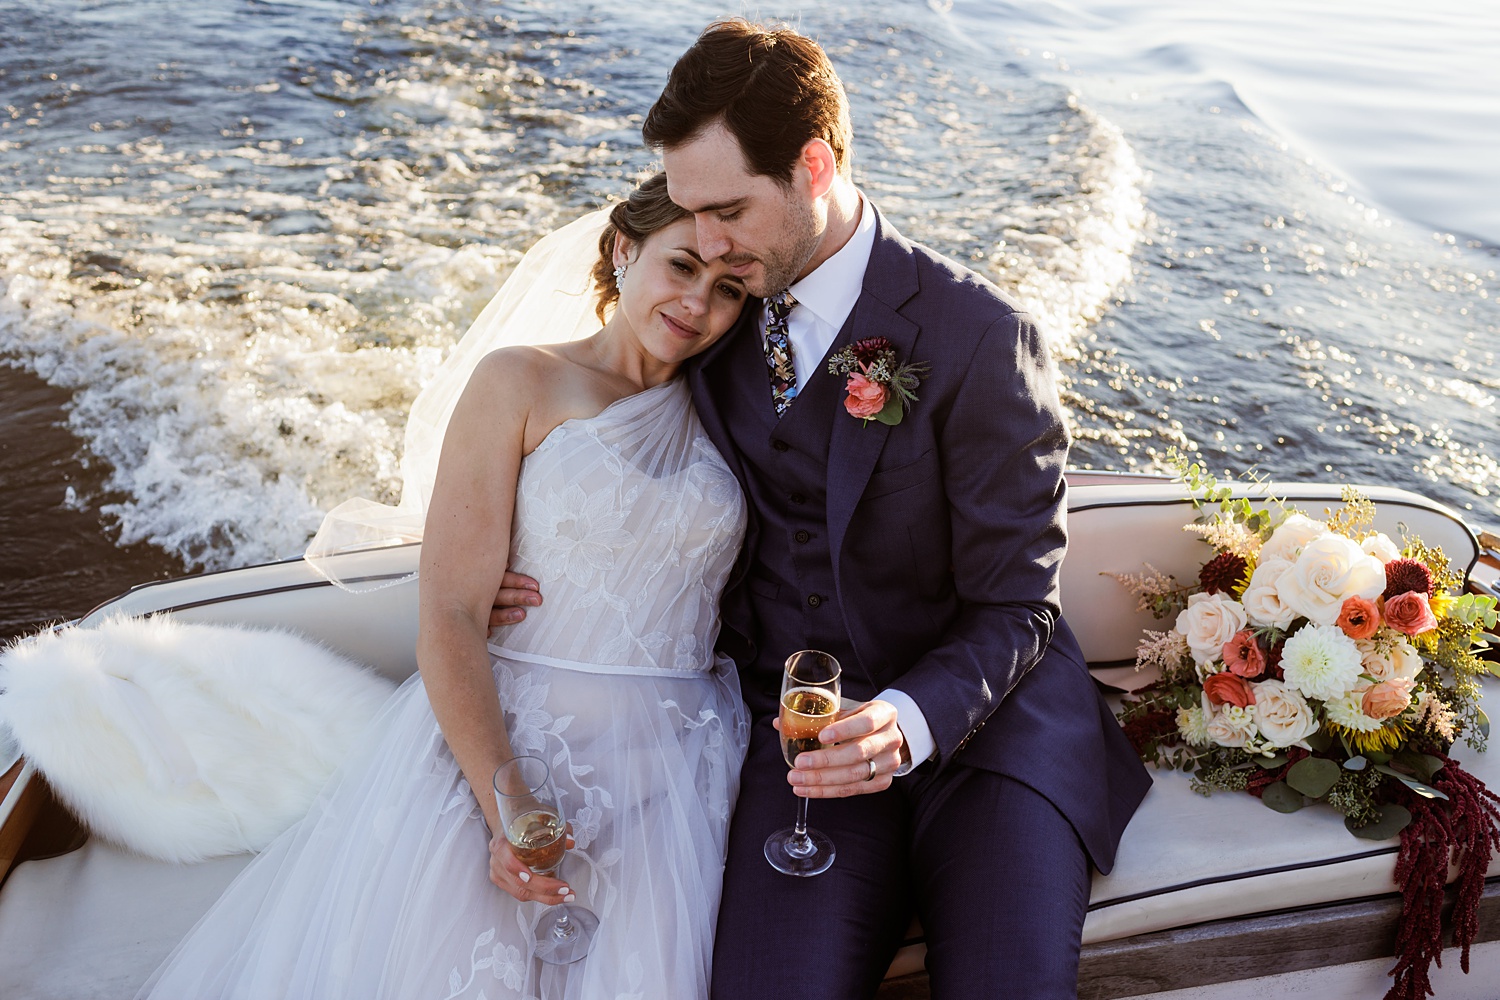 The newlyweds snuggle one another on the boat after the ceremony at Migis Lodge Resort Maine